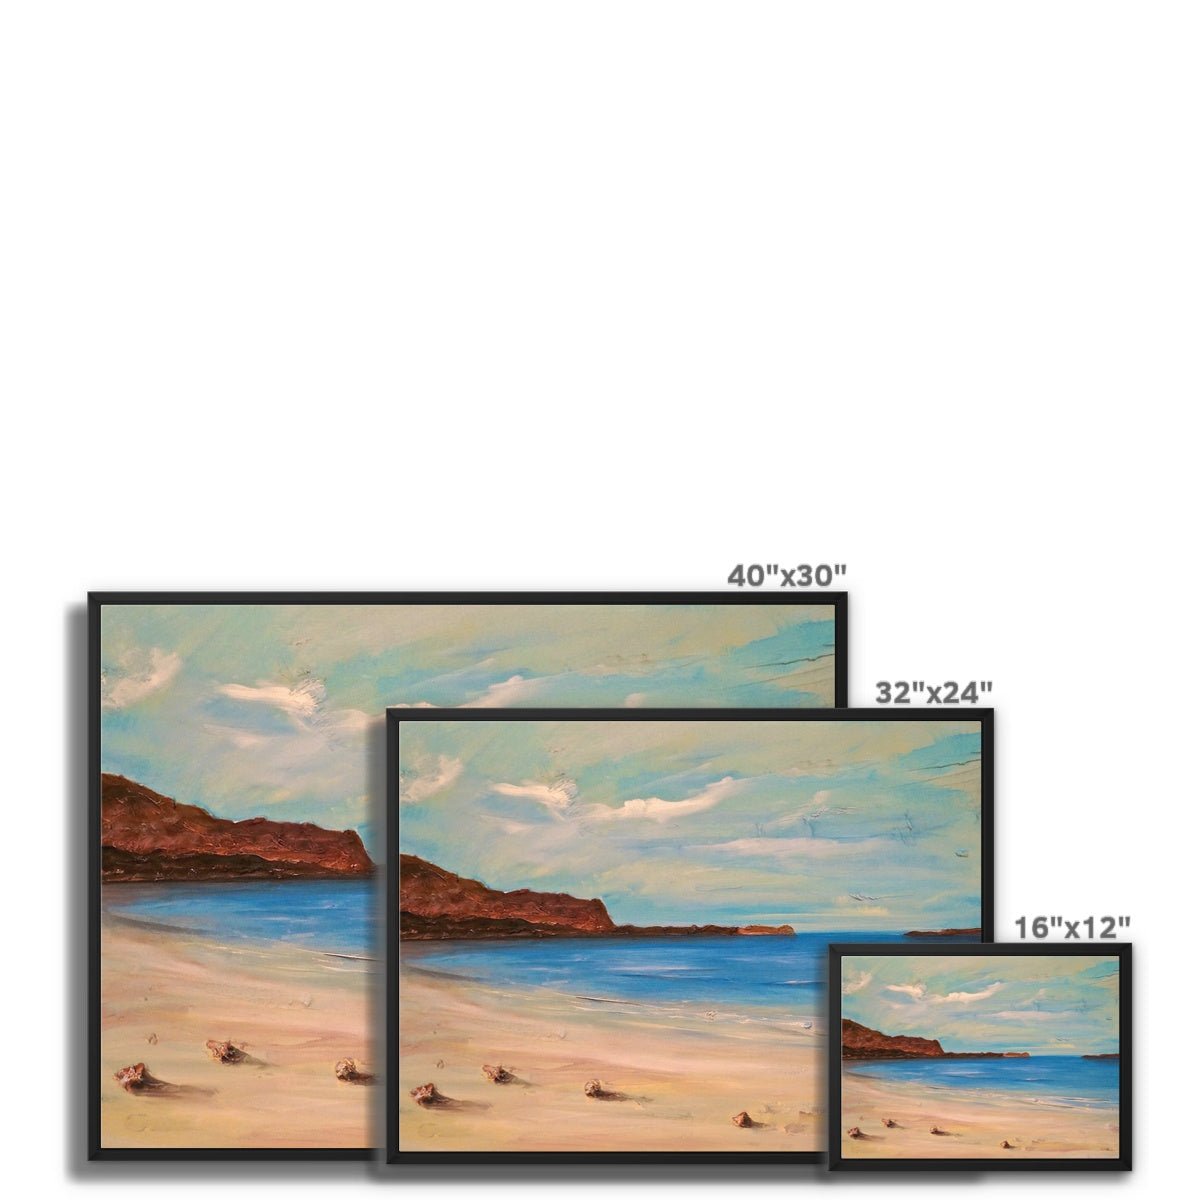 Bosta Beach Lewis Painting | Framed Canvas From Scotland-Floating Framed Canvas Prints-Hebridean Islands Art Gallery-Paintings, Prints, Homeware, Art Gifts From Scotland By Scottish Artist Kevin Hunter